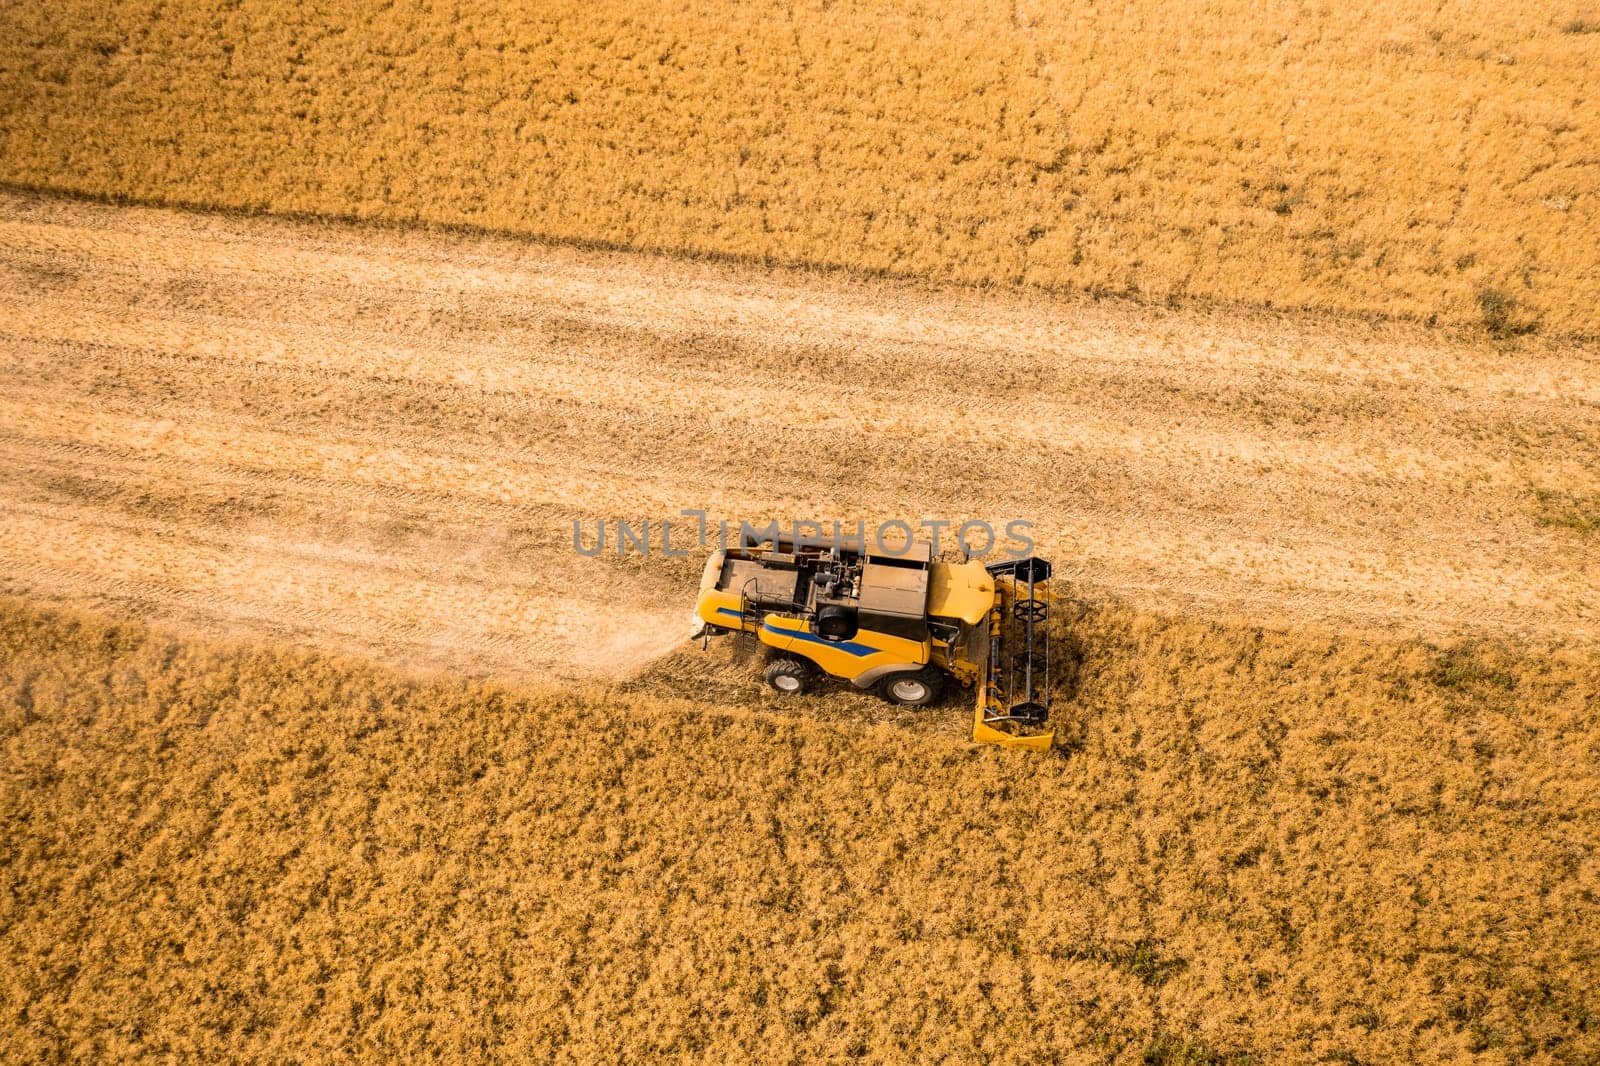 Top view of a combine harvester harvesting wheat from a field.